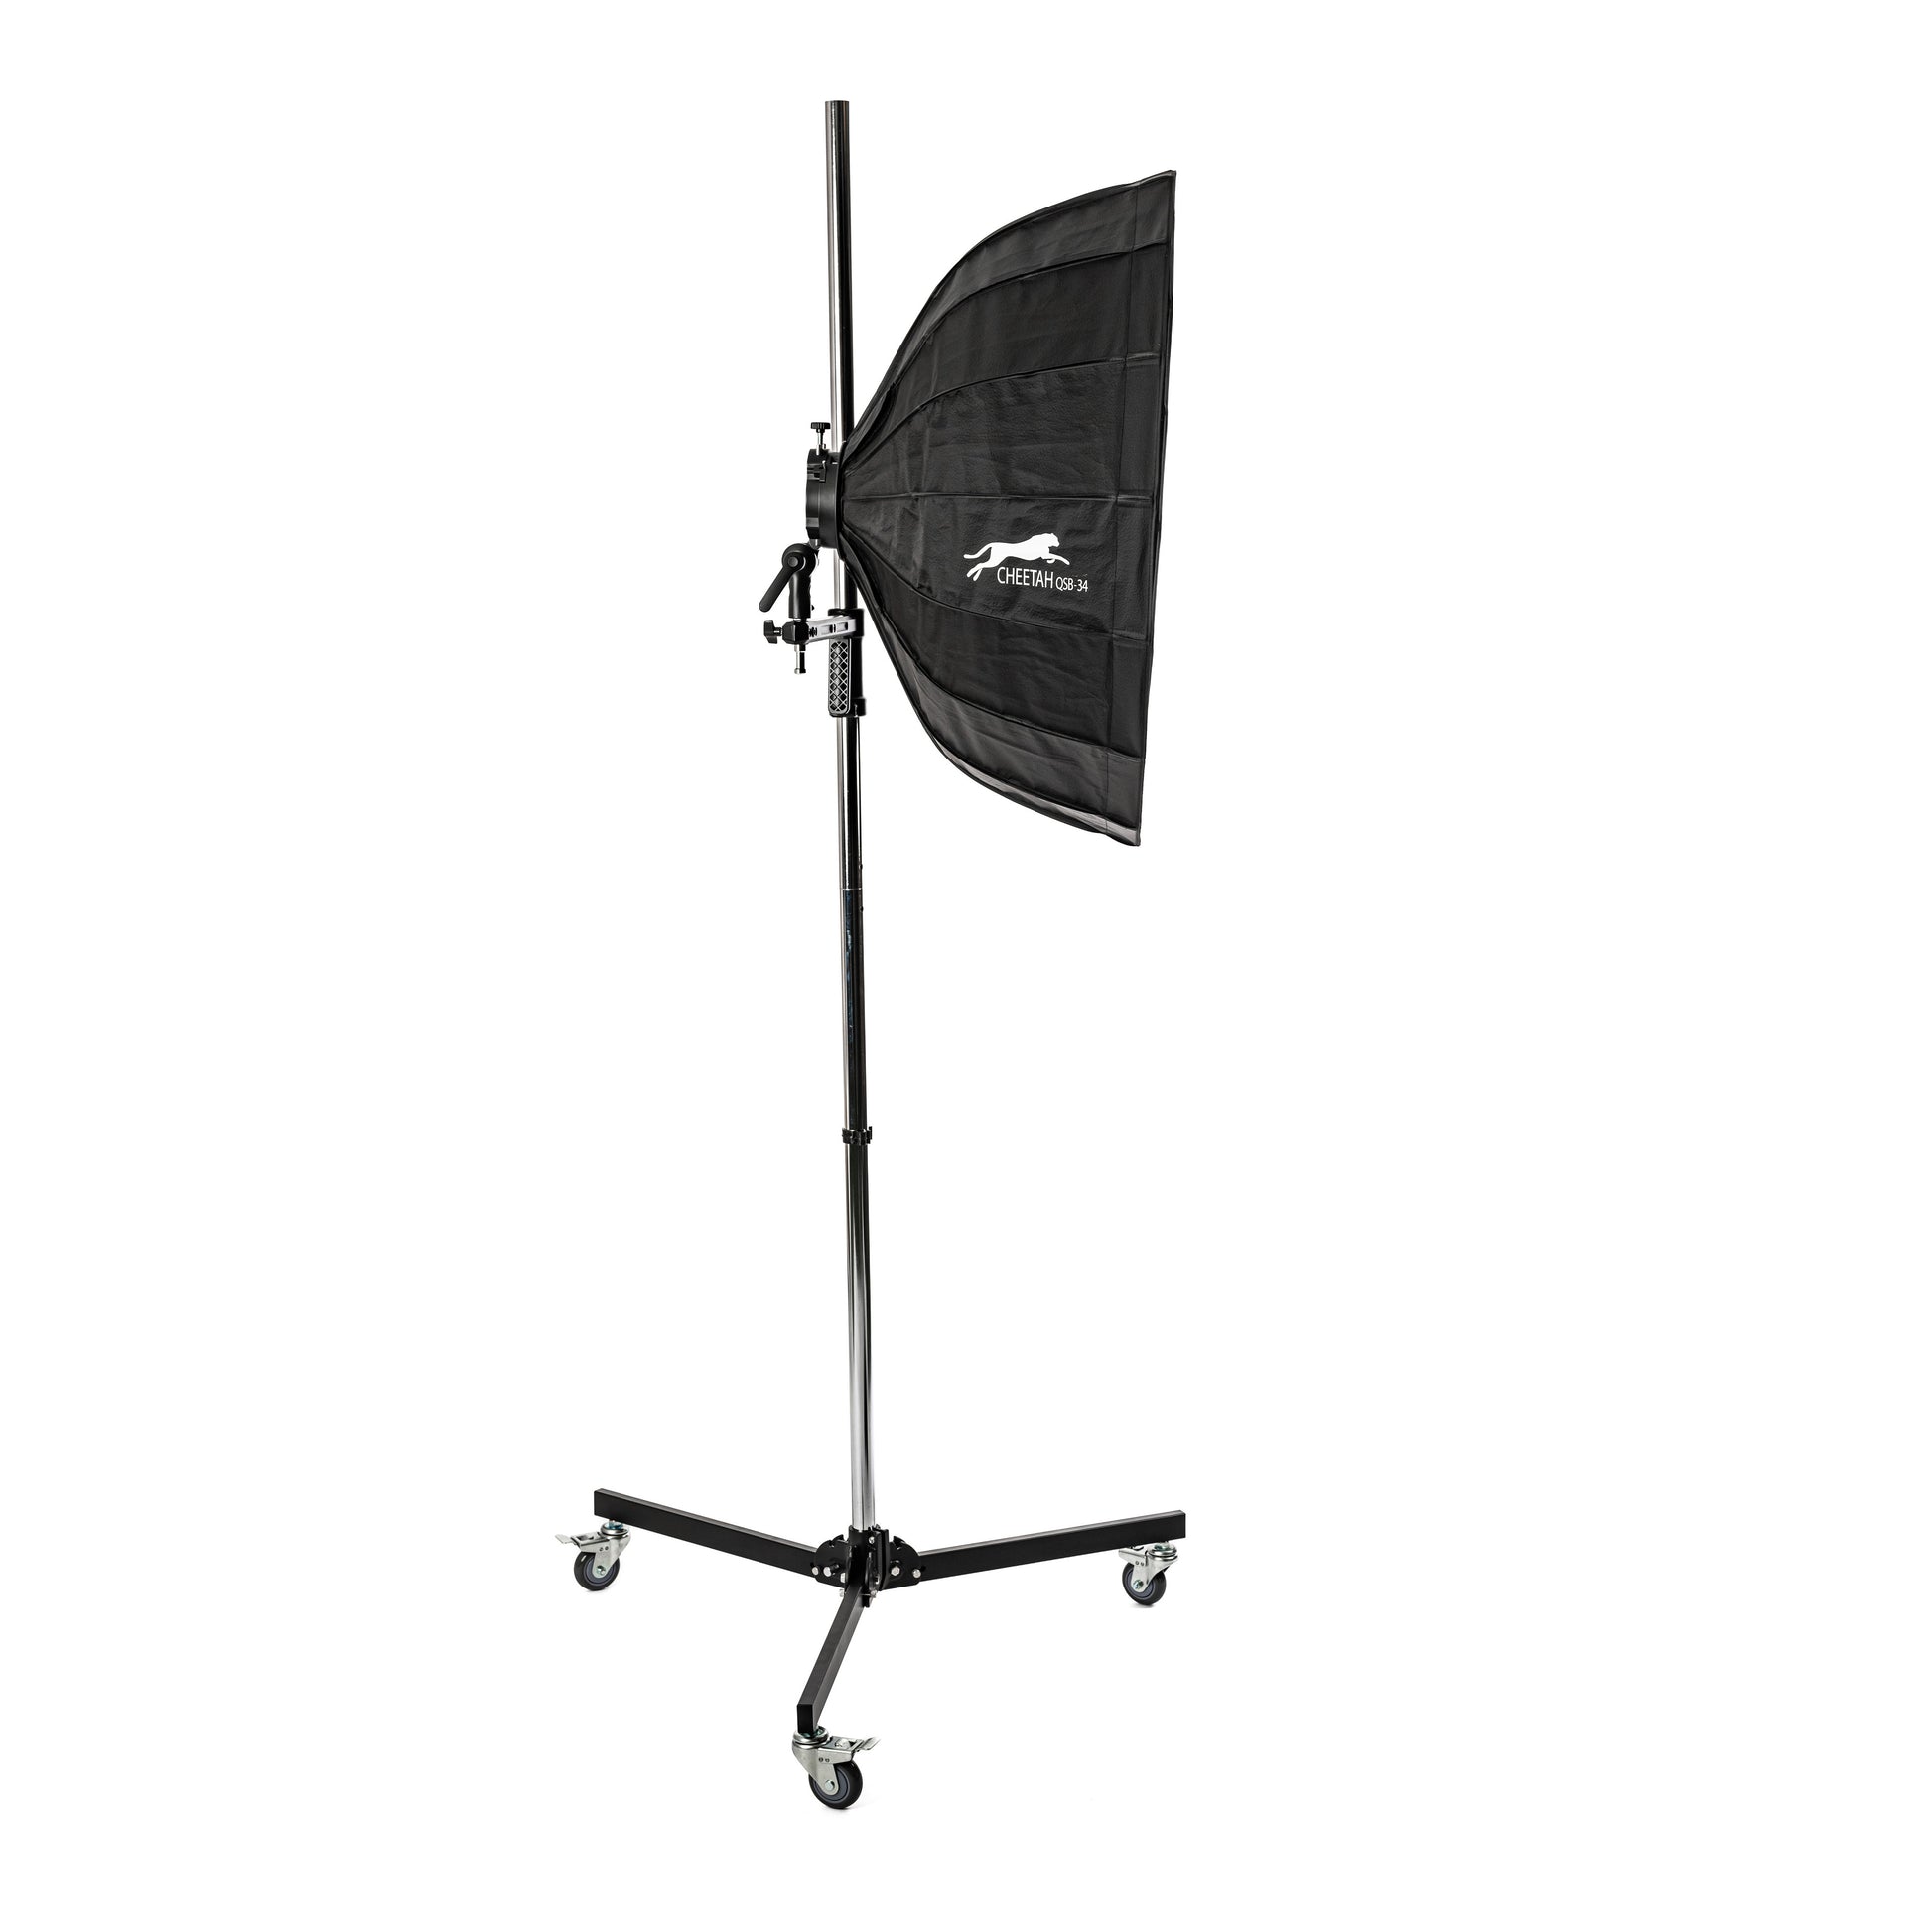 Cheetahstand Single Pistol Grip With QSB34 Softbox Mounted